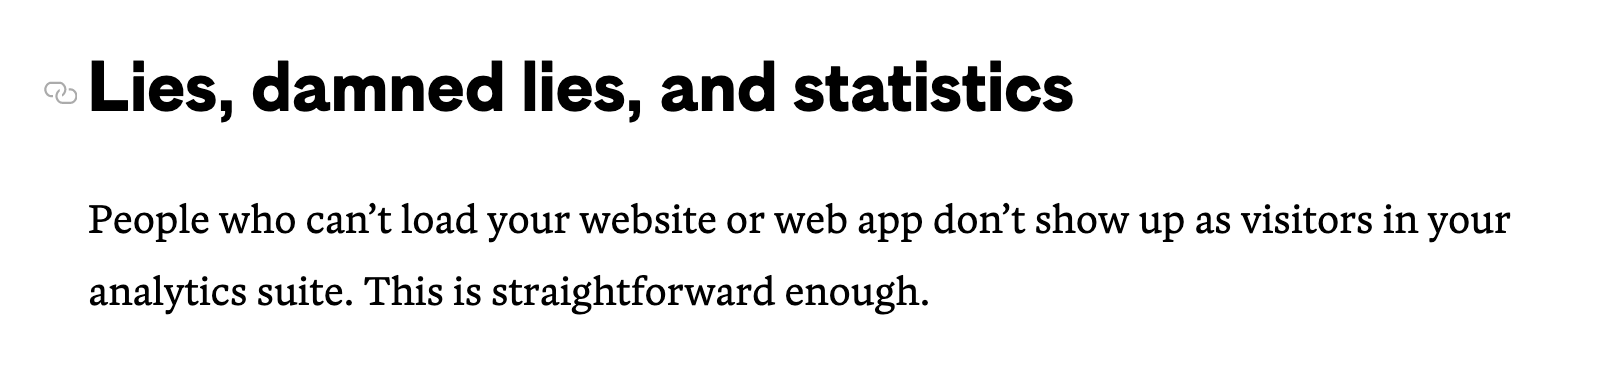 Lies, damned lies, and statistics – People who can’t load your website or web app don’t show up as visitors in your analytics suite. This is straightforward enough.